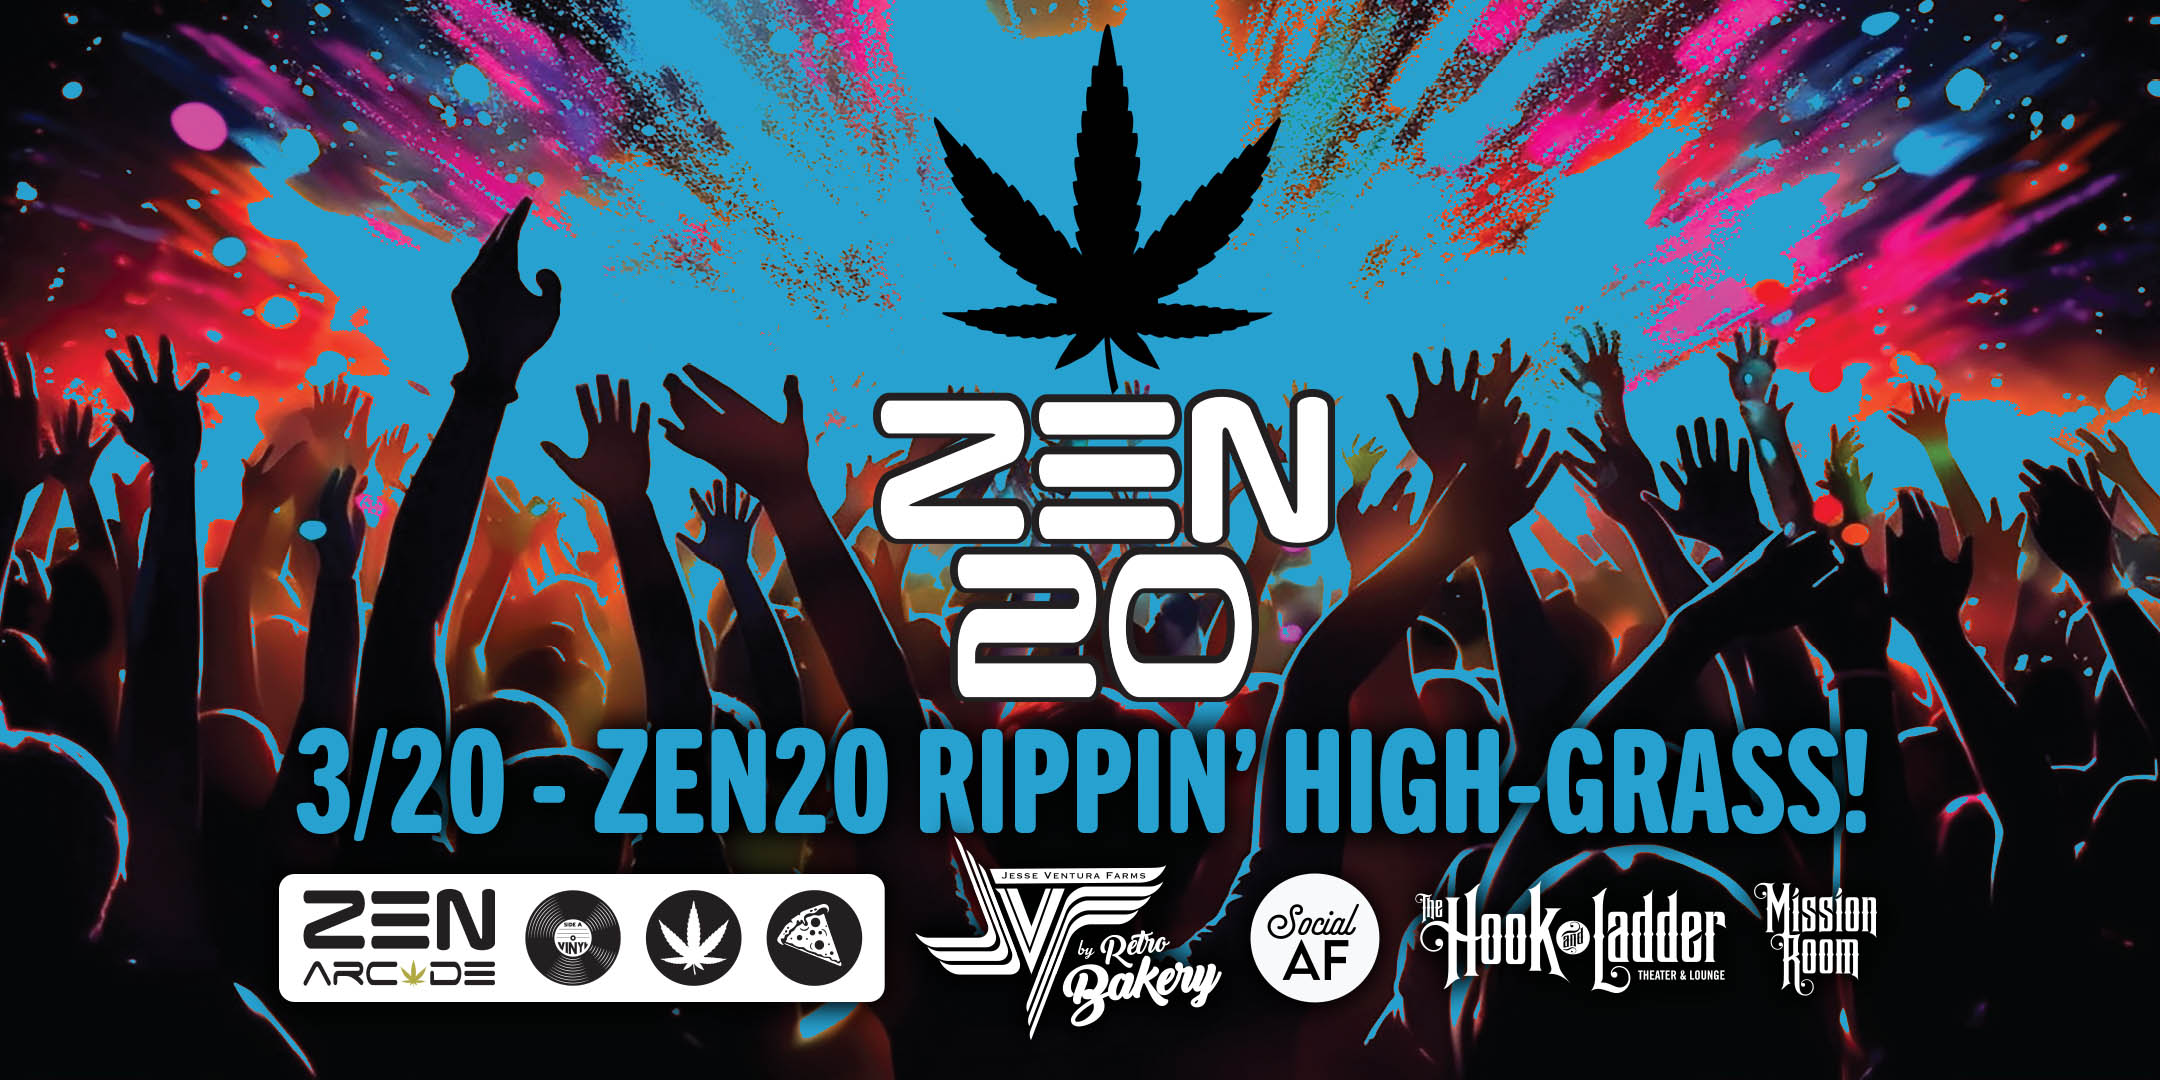 Wednesday, March 20th - Zen20 Rippin’ High-Grass! Wednesday evening acoustic bluegrass concert with The Lake Monsters and Social AF Stoner Bingo! Mission Room at the Hook / Zen Arcade Doors 4:20pm ::Music 6:30pm :: 21+ FREE